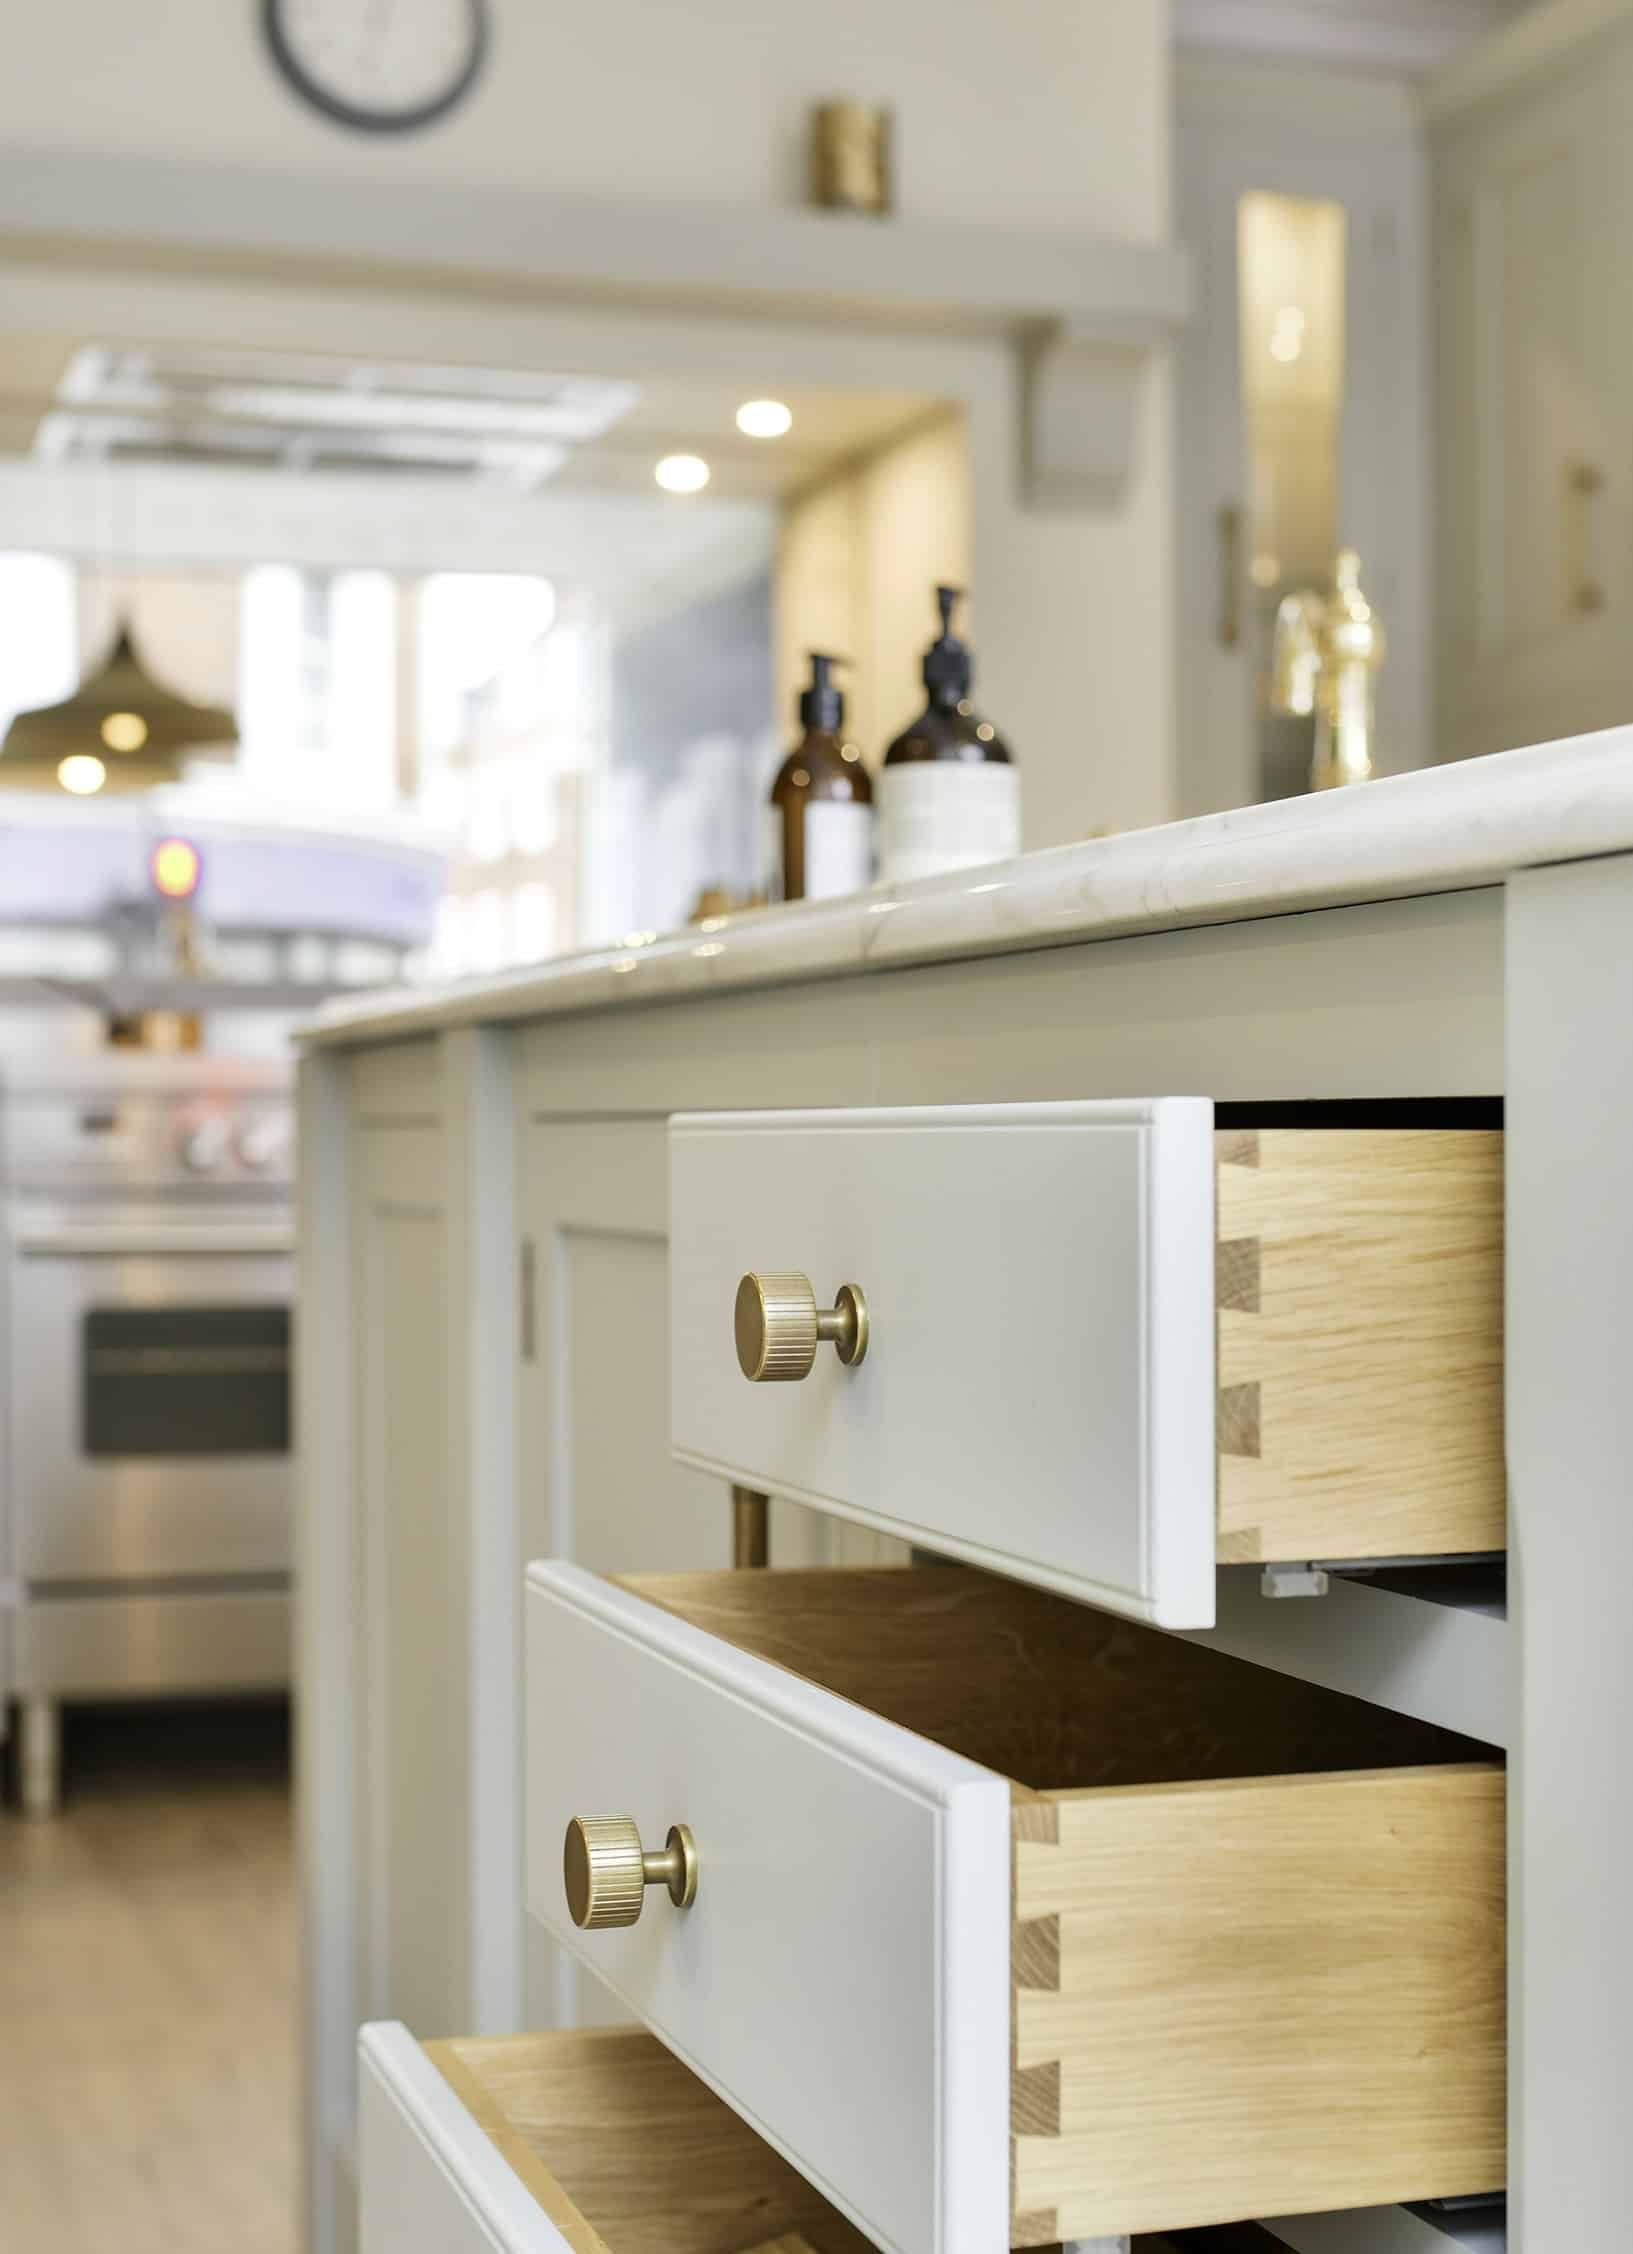 cabinets-designed-for-life-image